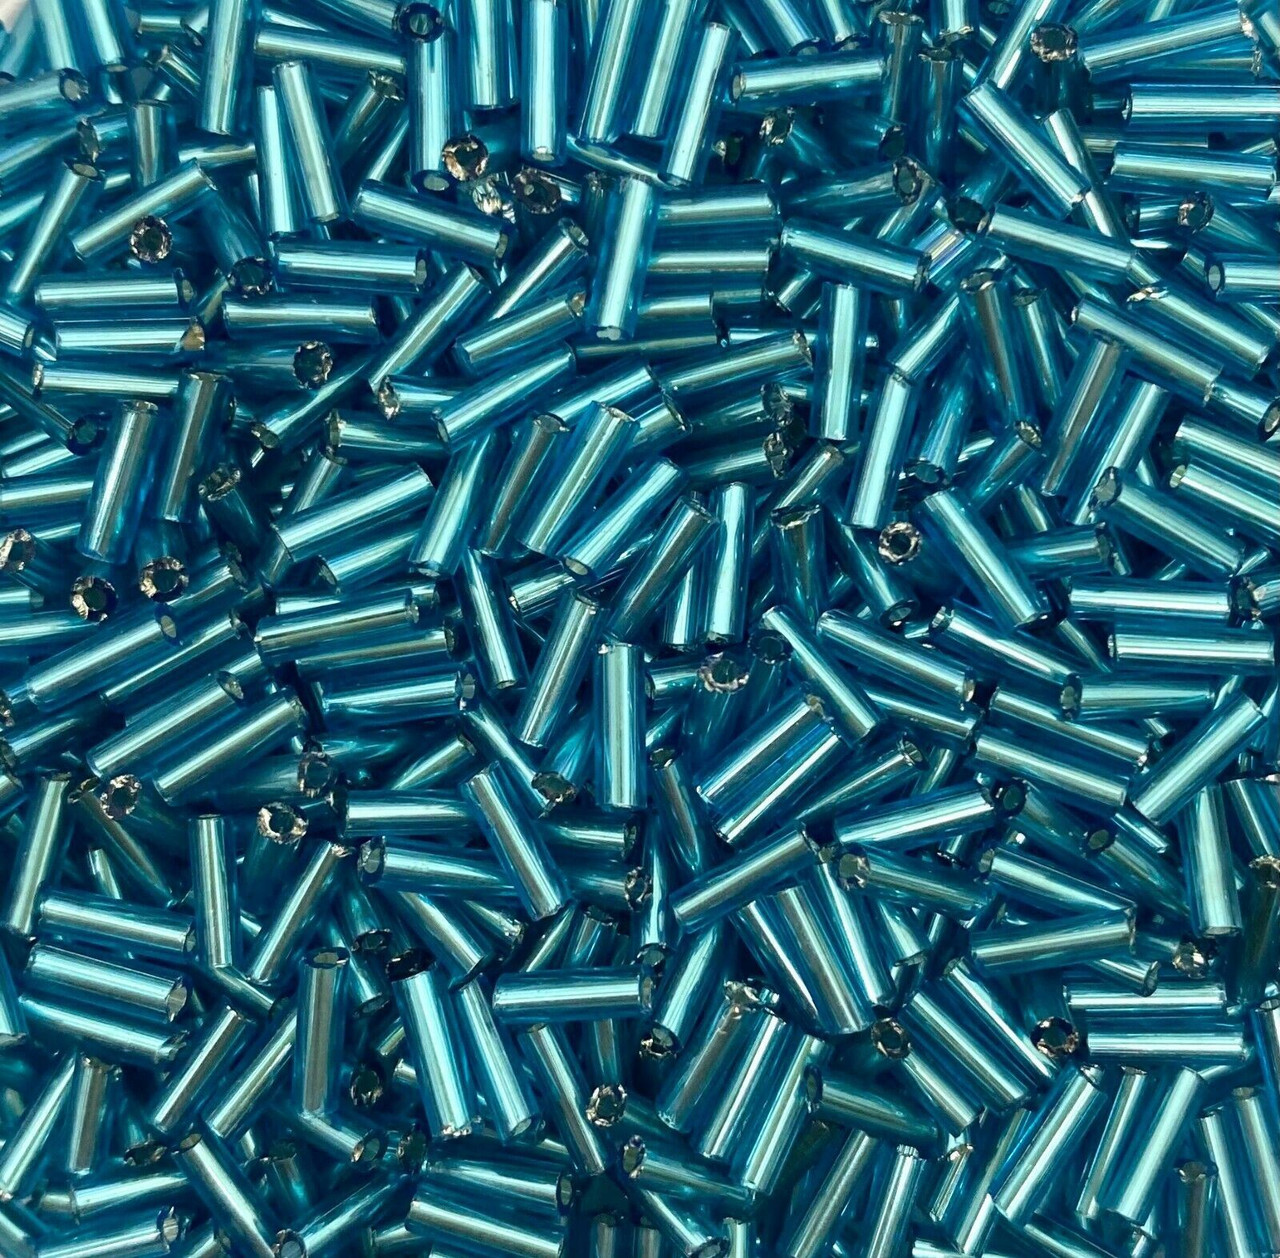 50g glass bugle beads - Turquoise Silver-Lined - approx 6mm